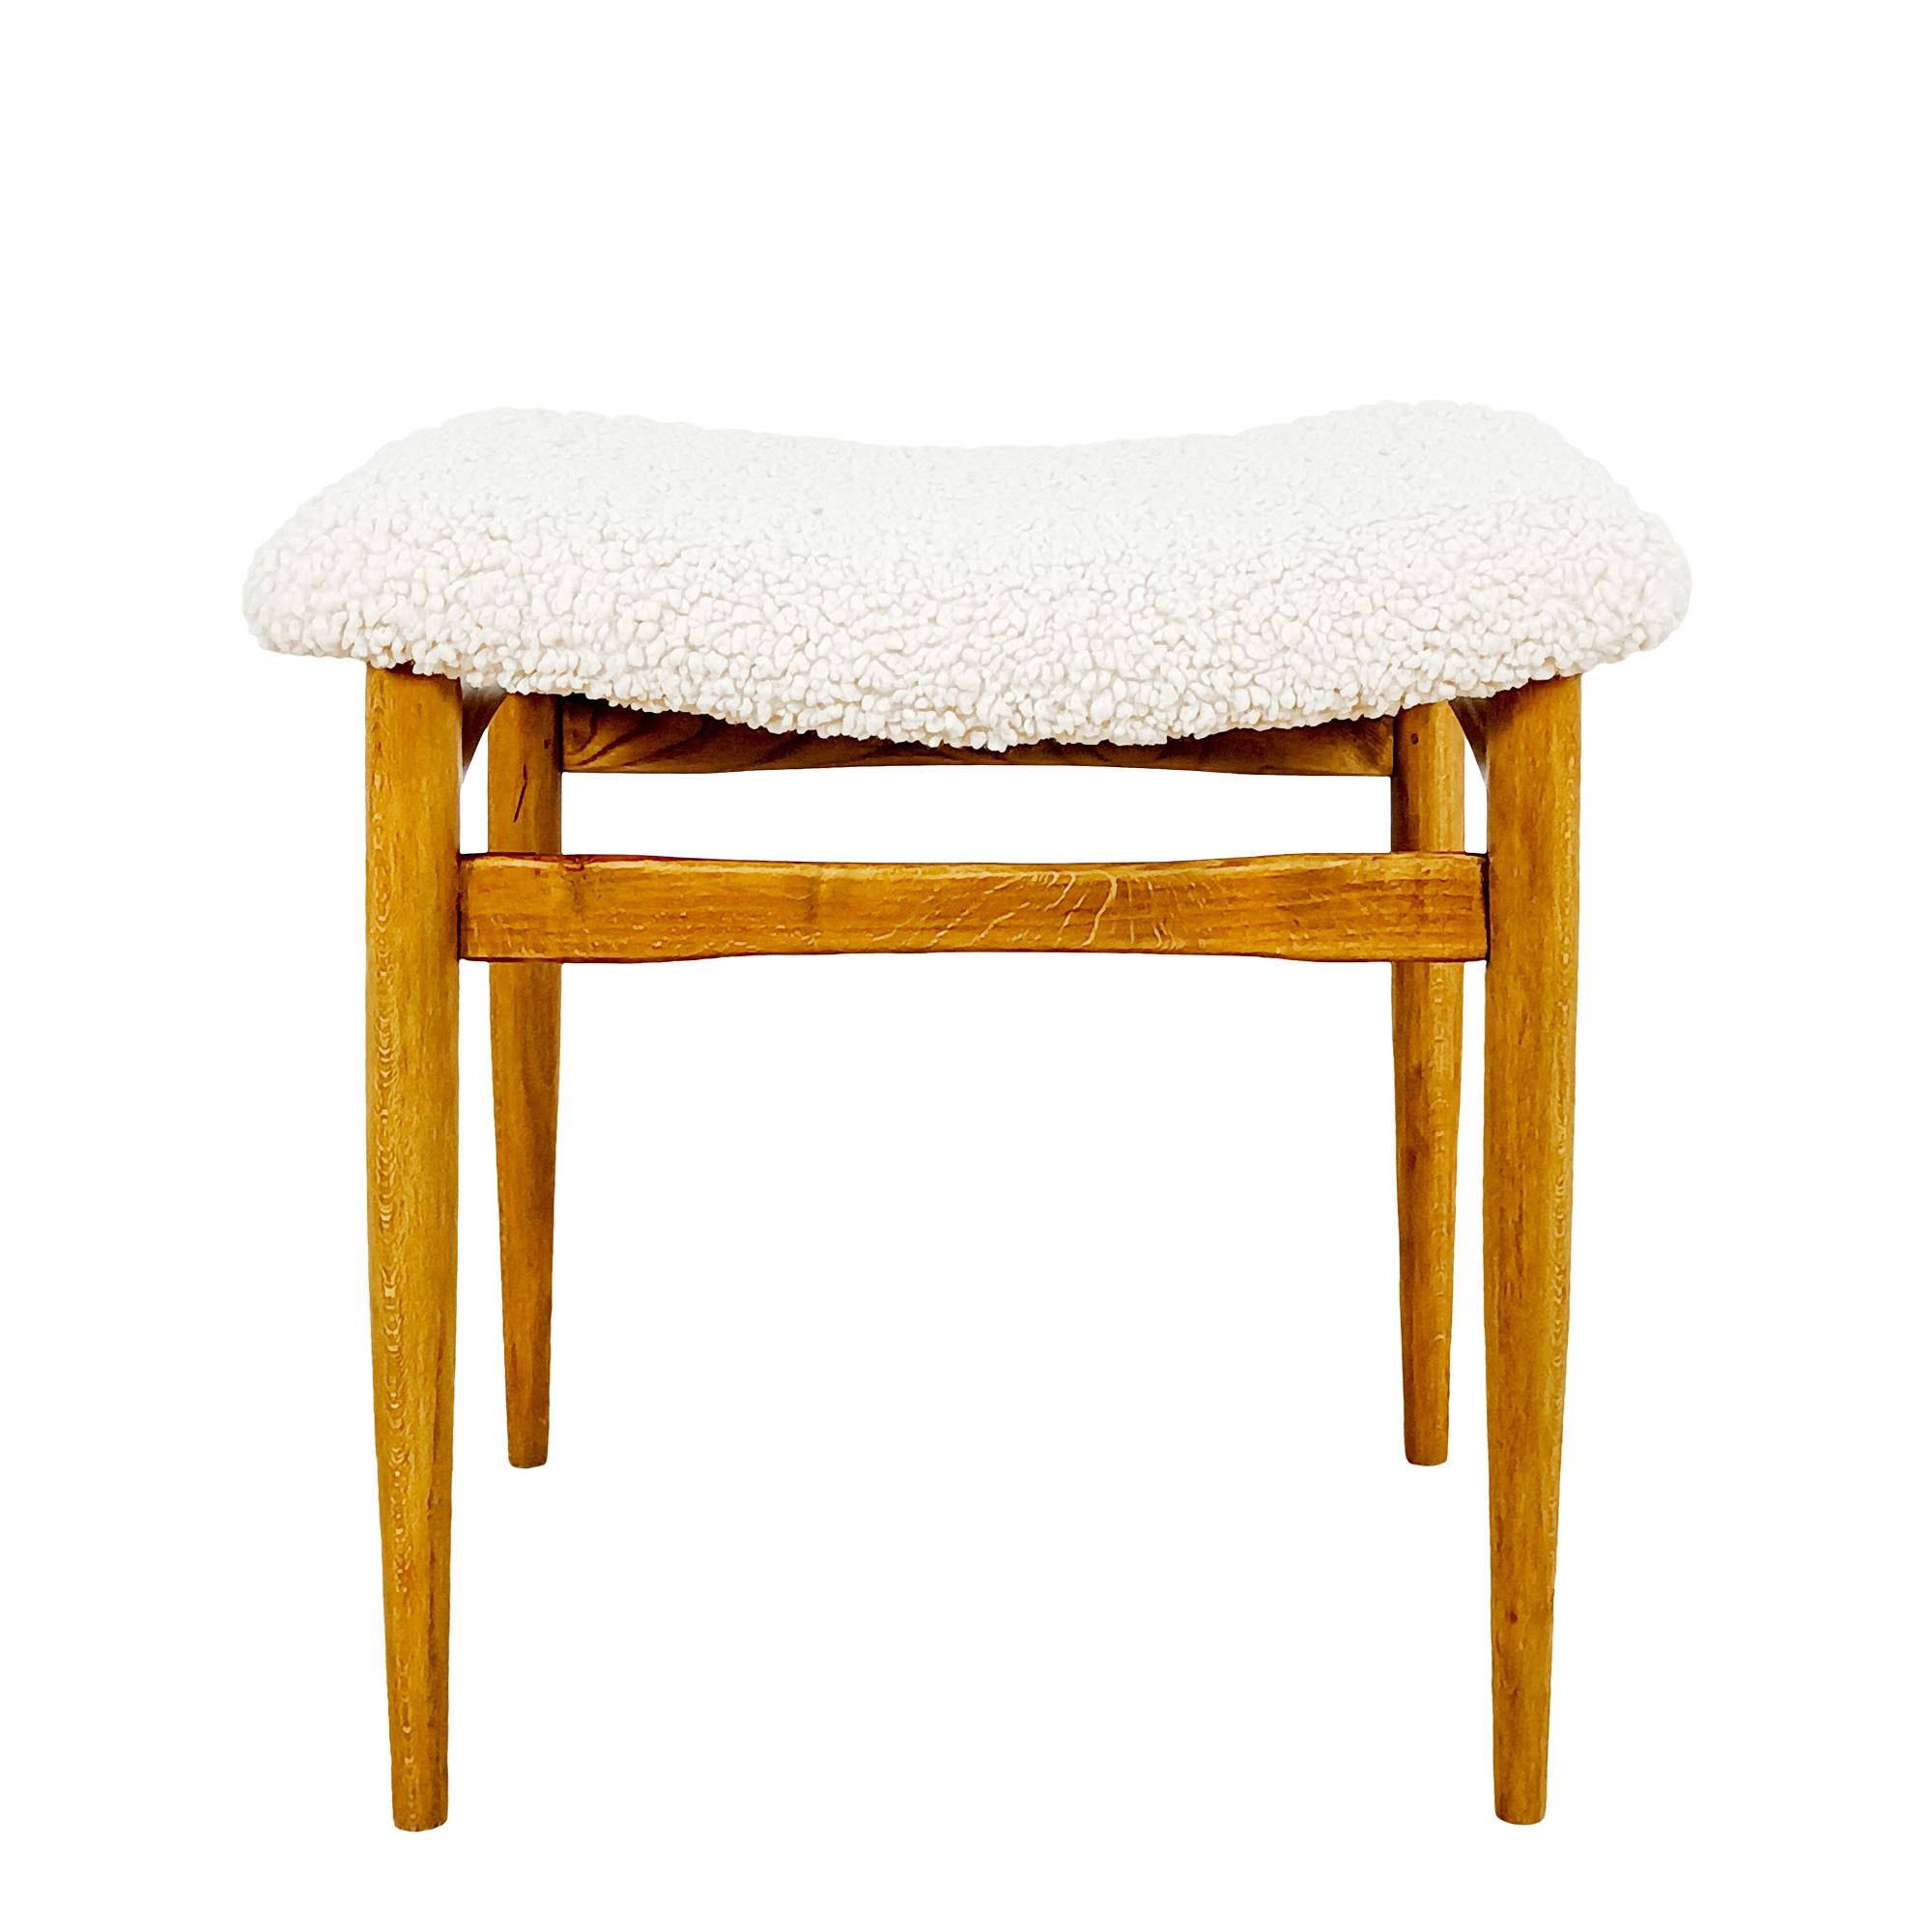 Pair of small benches in solid beech with gilded shellac finish. Upholstered with ivory curly fabric (comfort foam refurbished). Manufacturer’s label “Jelm S.L” in Olot – Spain.

Spain circa 1960.